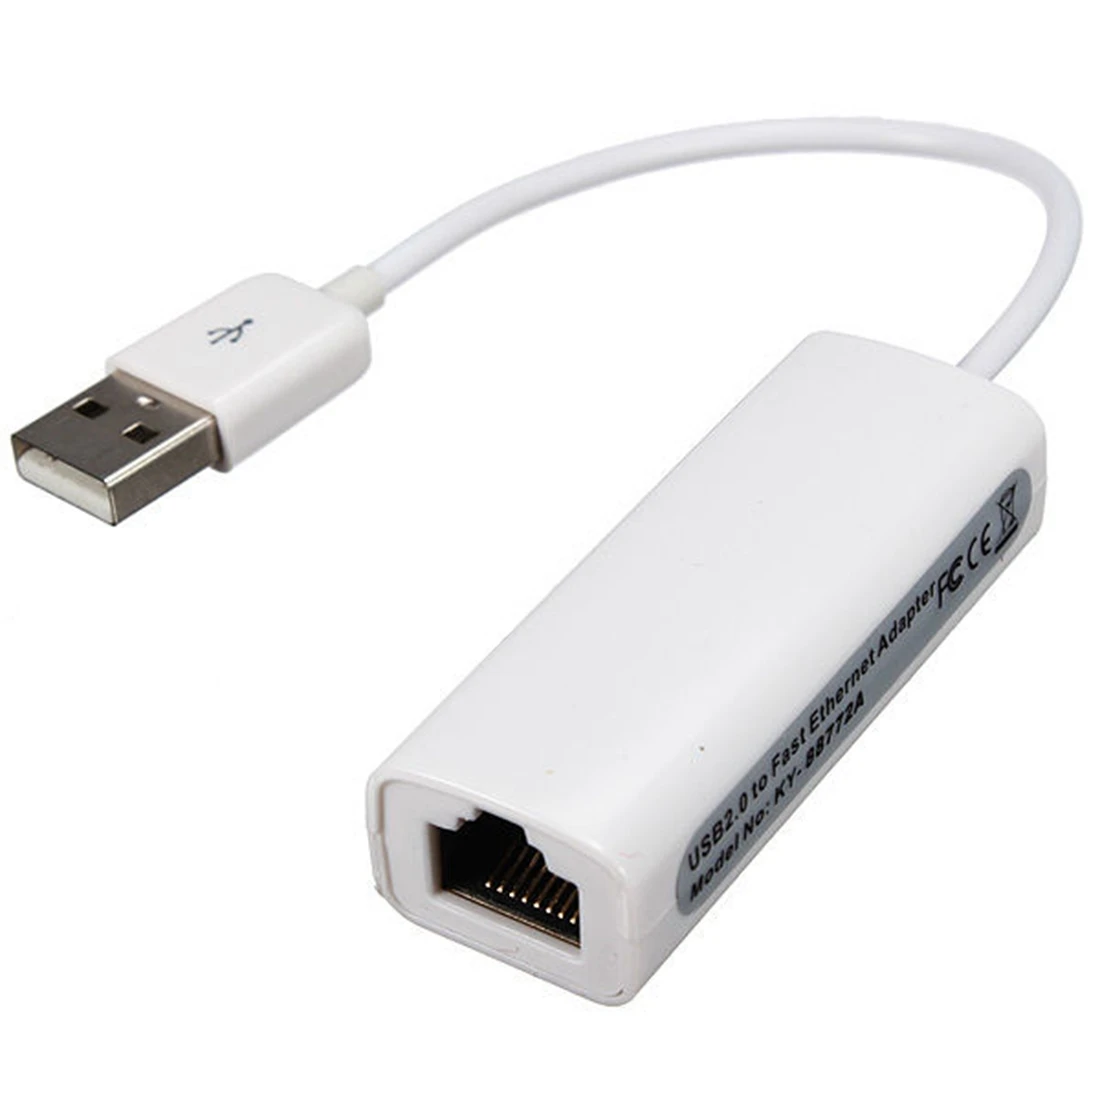 USB 2.0 to RJ45 LAN Ethernet Network Adapter For Apple Mac MacBook Air Laptop PC